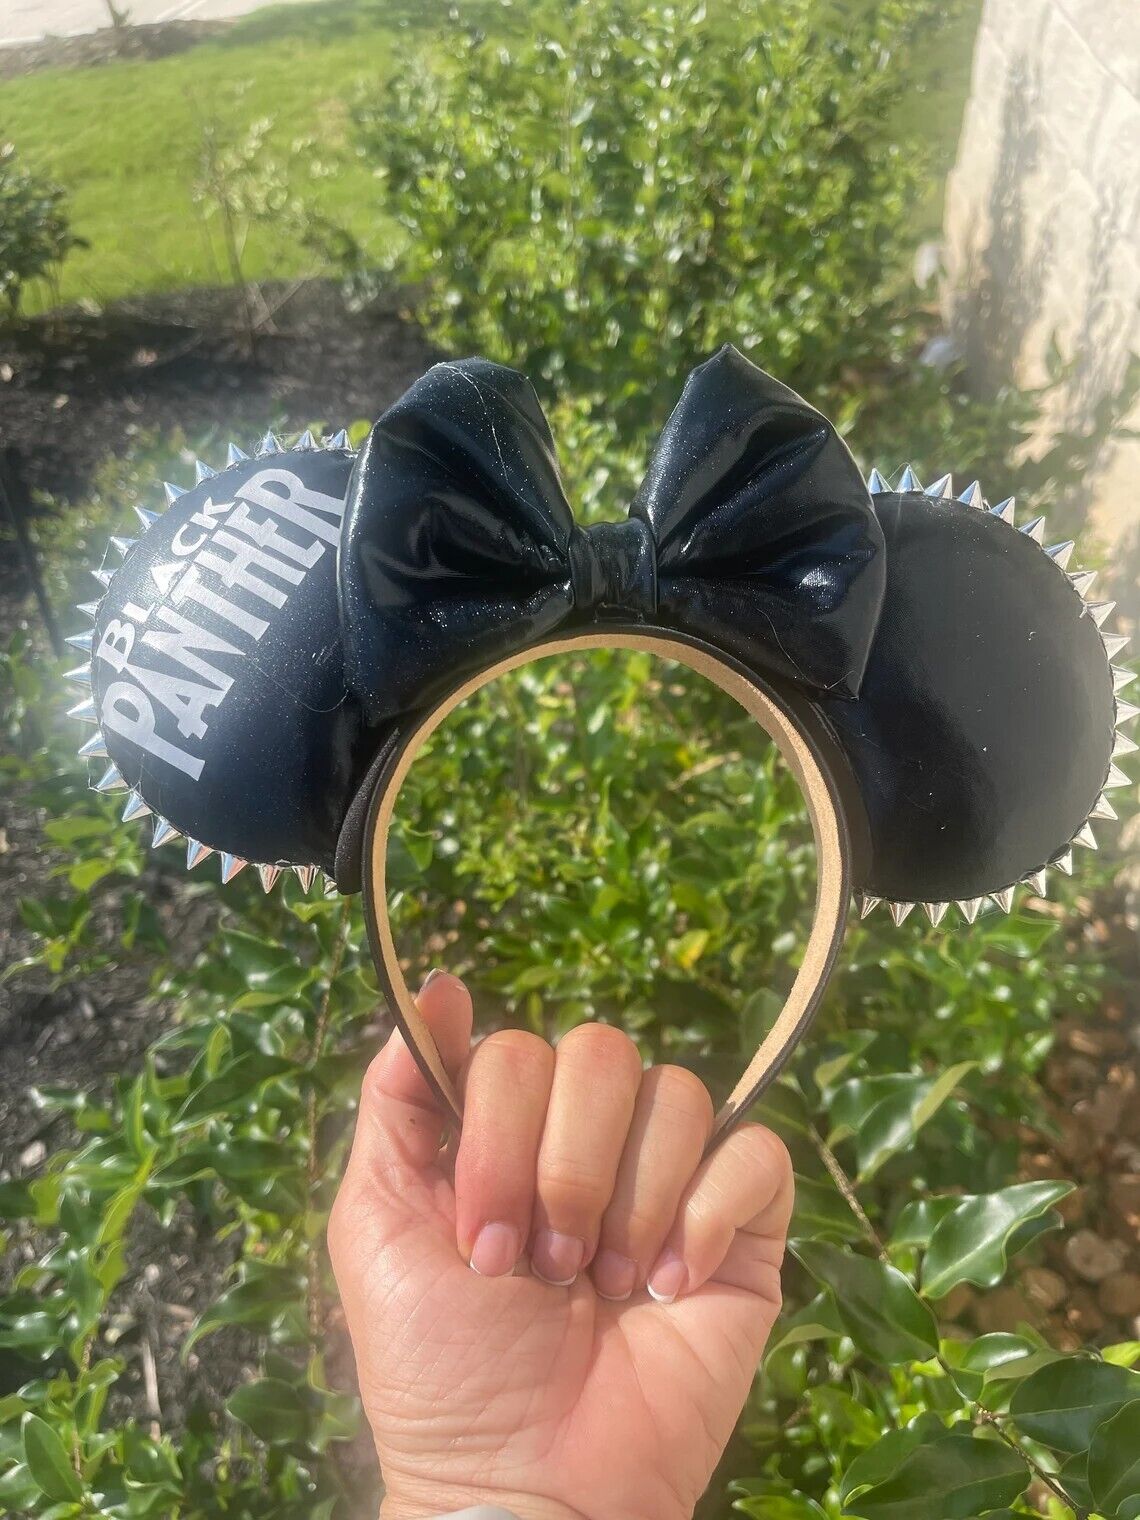 DIY Kit Black Panther Mickey Minnie Mouse ears sewing craft silver spikes